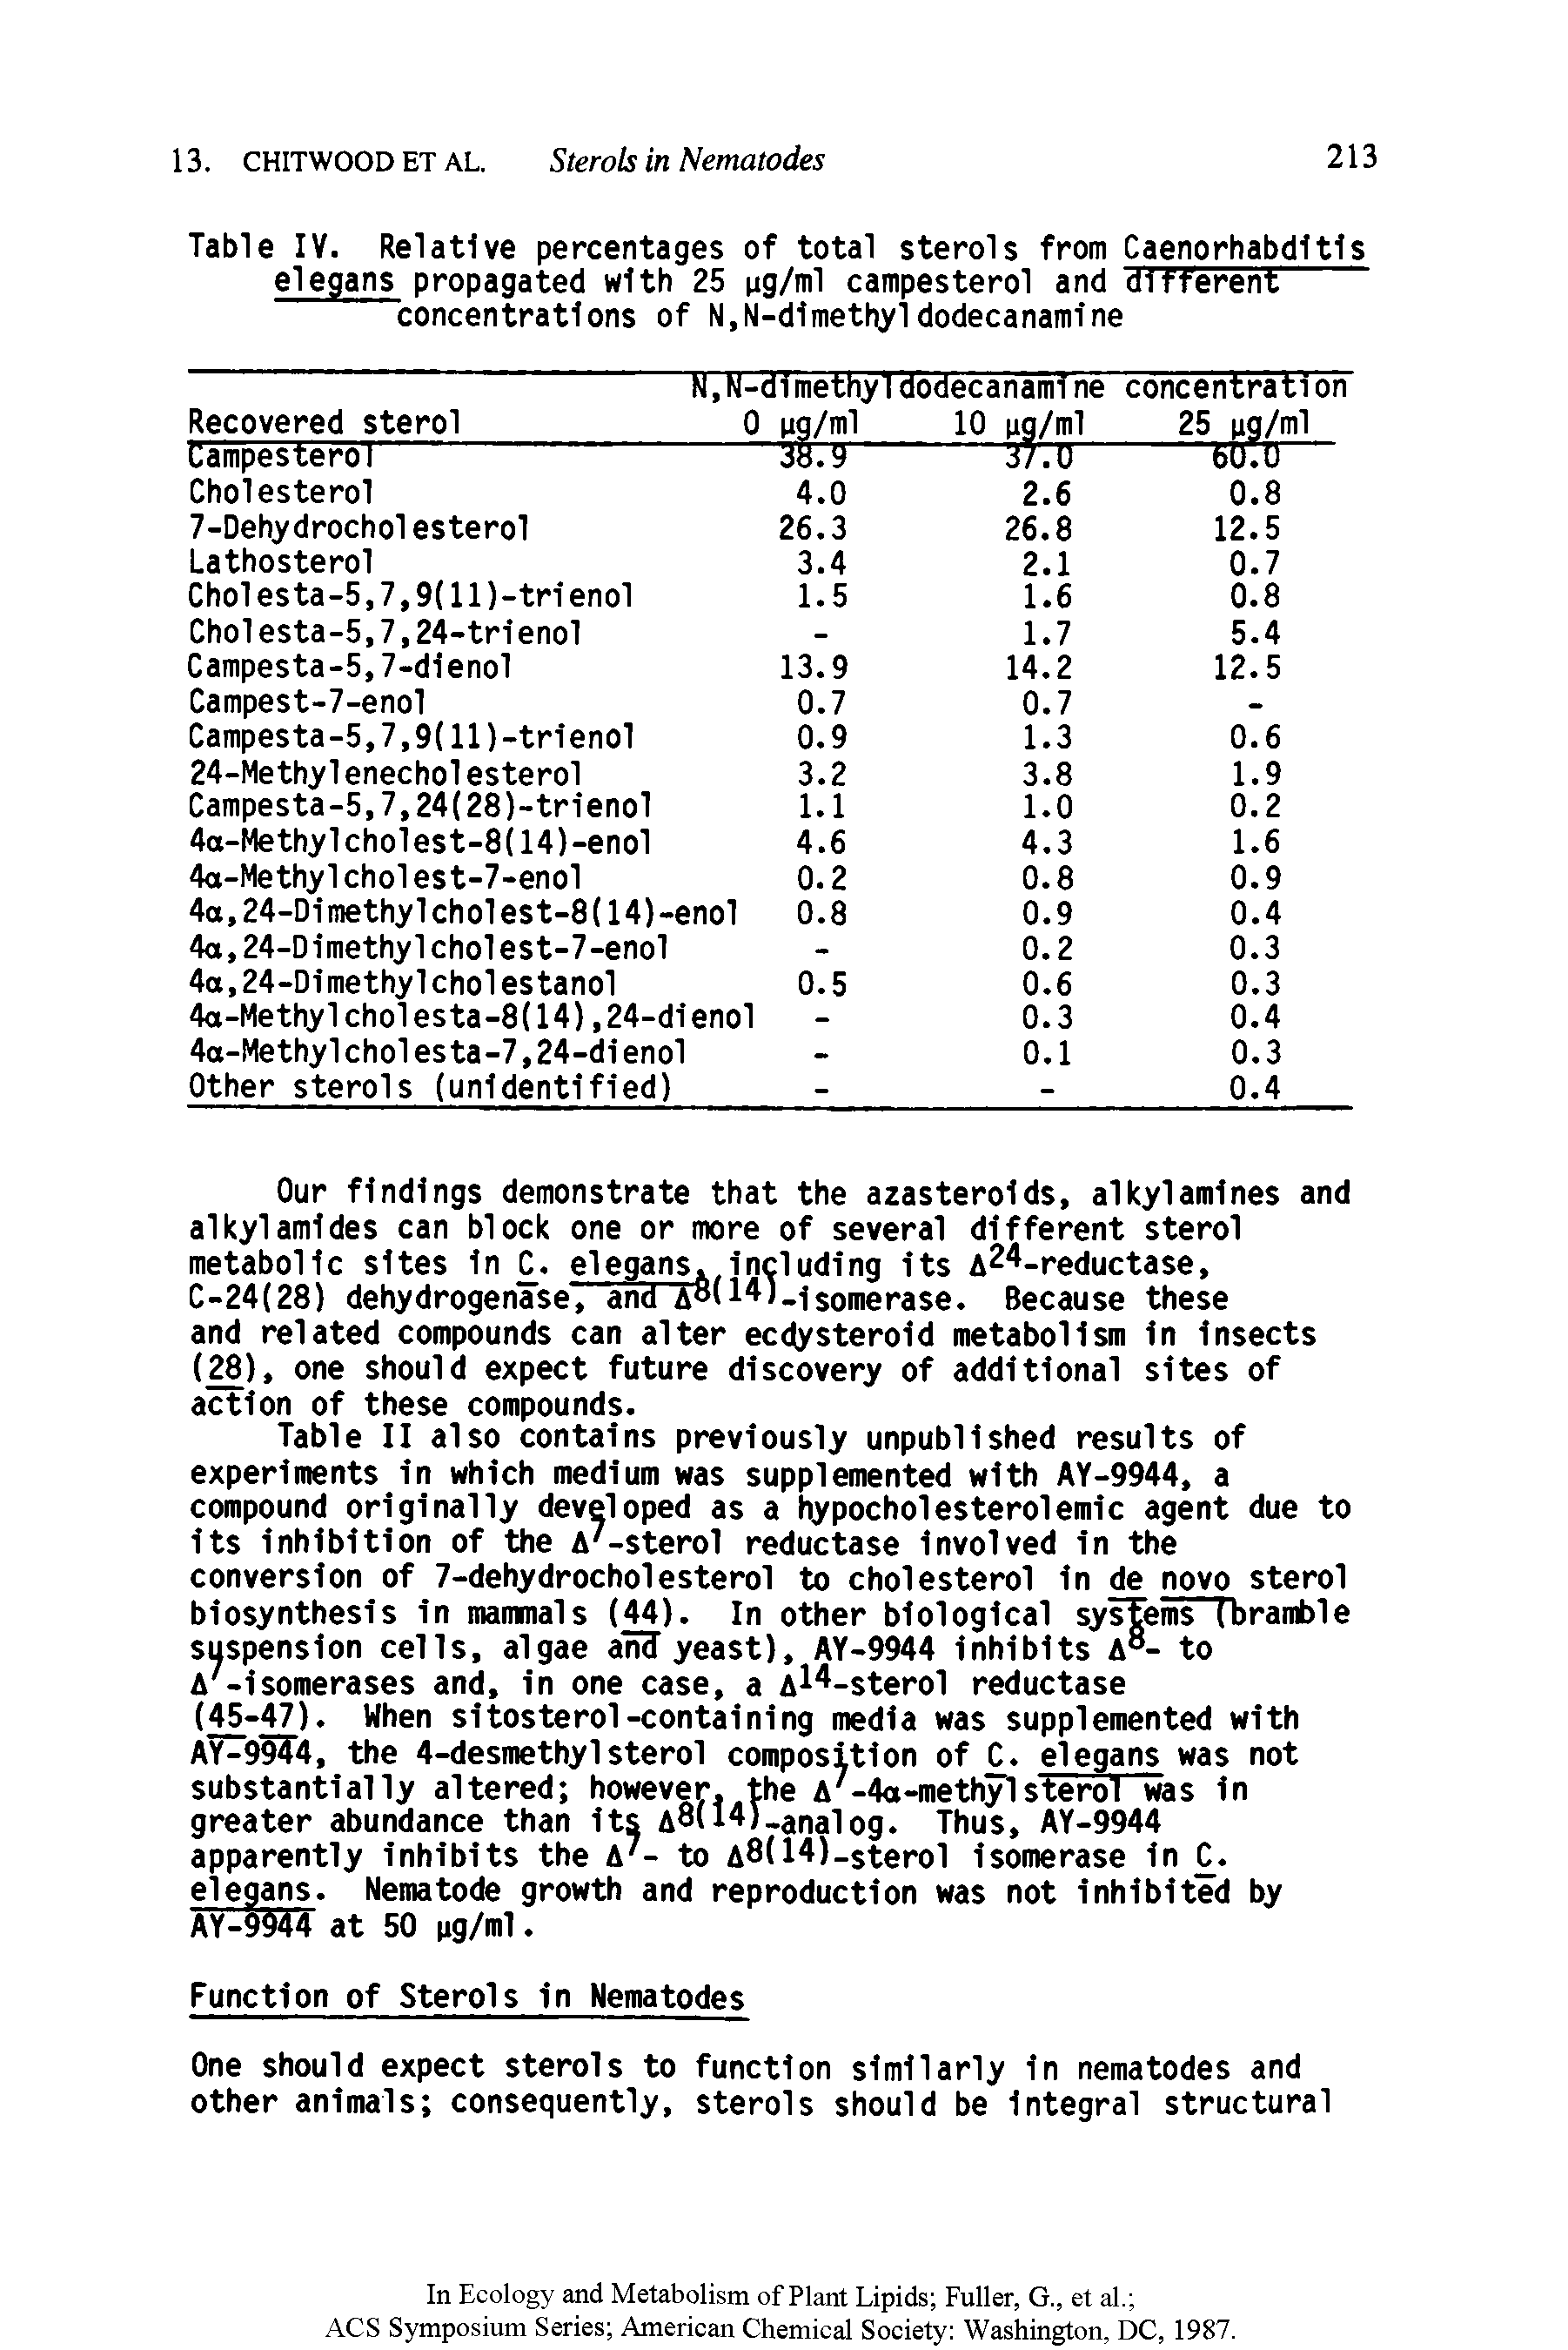 Table II also contains previously unpublished results of experiments In which medium was supplemented with AY-9944, a compound originally developed as a hypocholesterolemic agent due to Its Inhibition of the A -sterol reductase Involved In the conversion of 7-dehydrocholesterol to cholesterol In de novo sterol biosynthesis In mammals (44). In other biological sys ms (bramble suspension cells, algae an yeast), AY-9944 Inhibits A - to A -lsomerases and. In one case, a A -sterol reductase (45-47). When sitosterol-containing media was supplemented with...